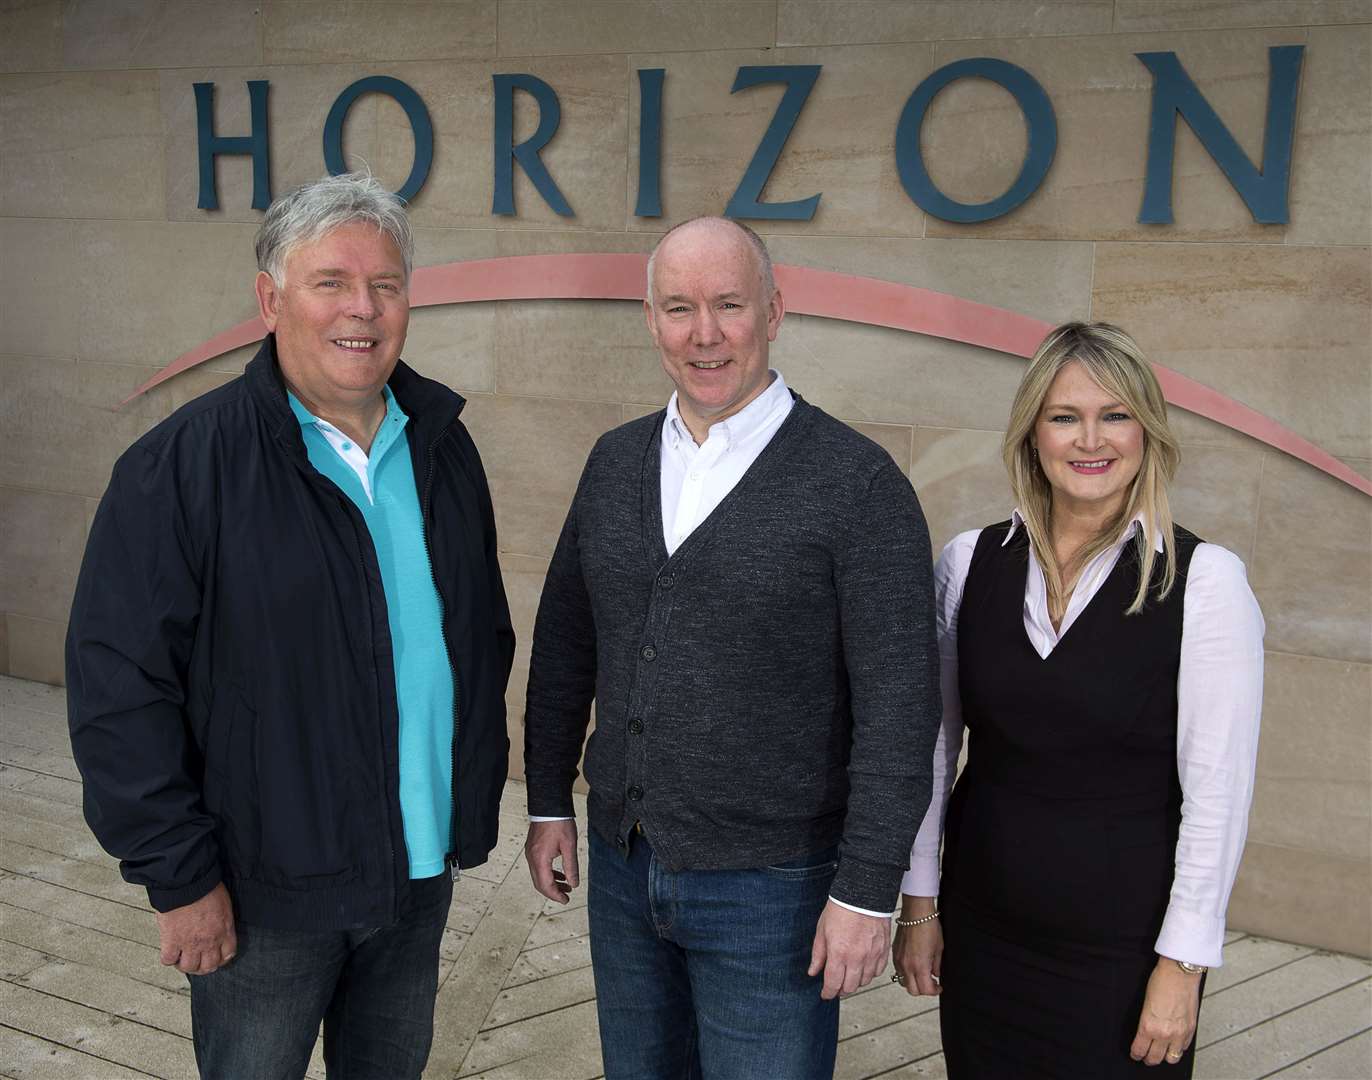 The HIE Moray Accelerator launch at Horizon, in Forres. From left, Craig Robertson, senior area business manager at Business Gateway, Andy Campbell, head of accelerators at Elevator, and Carol Davidson, HIE development manager.